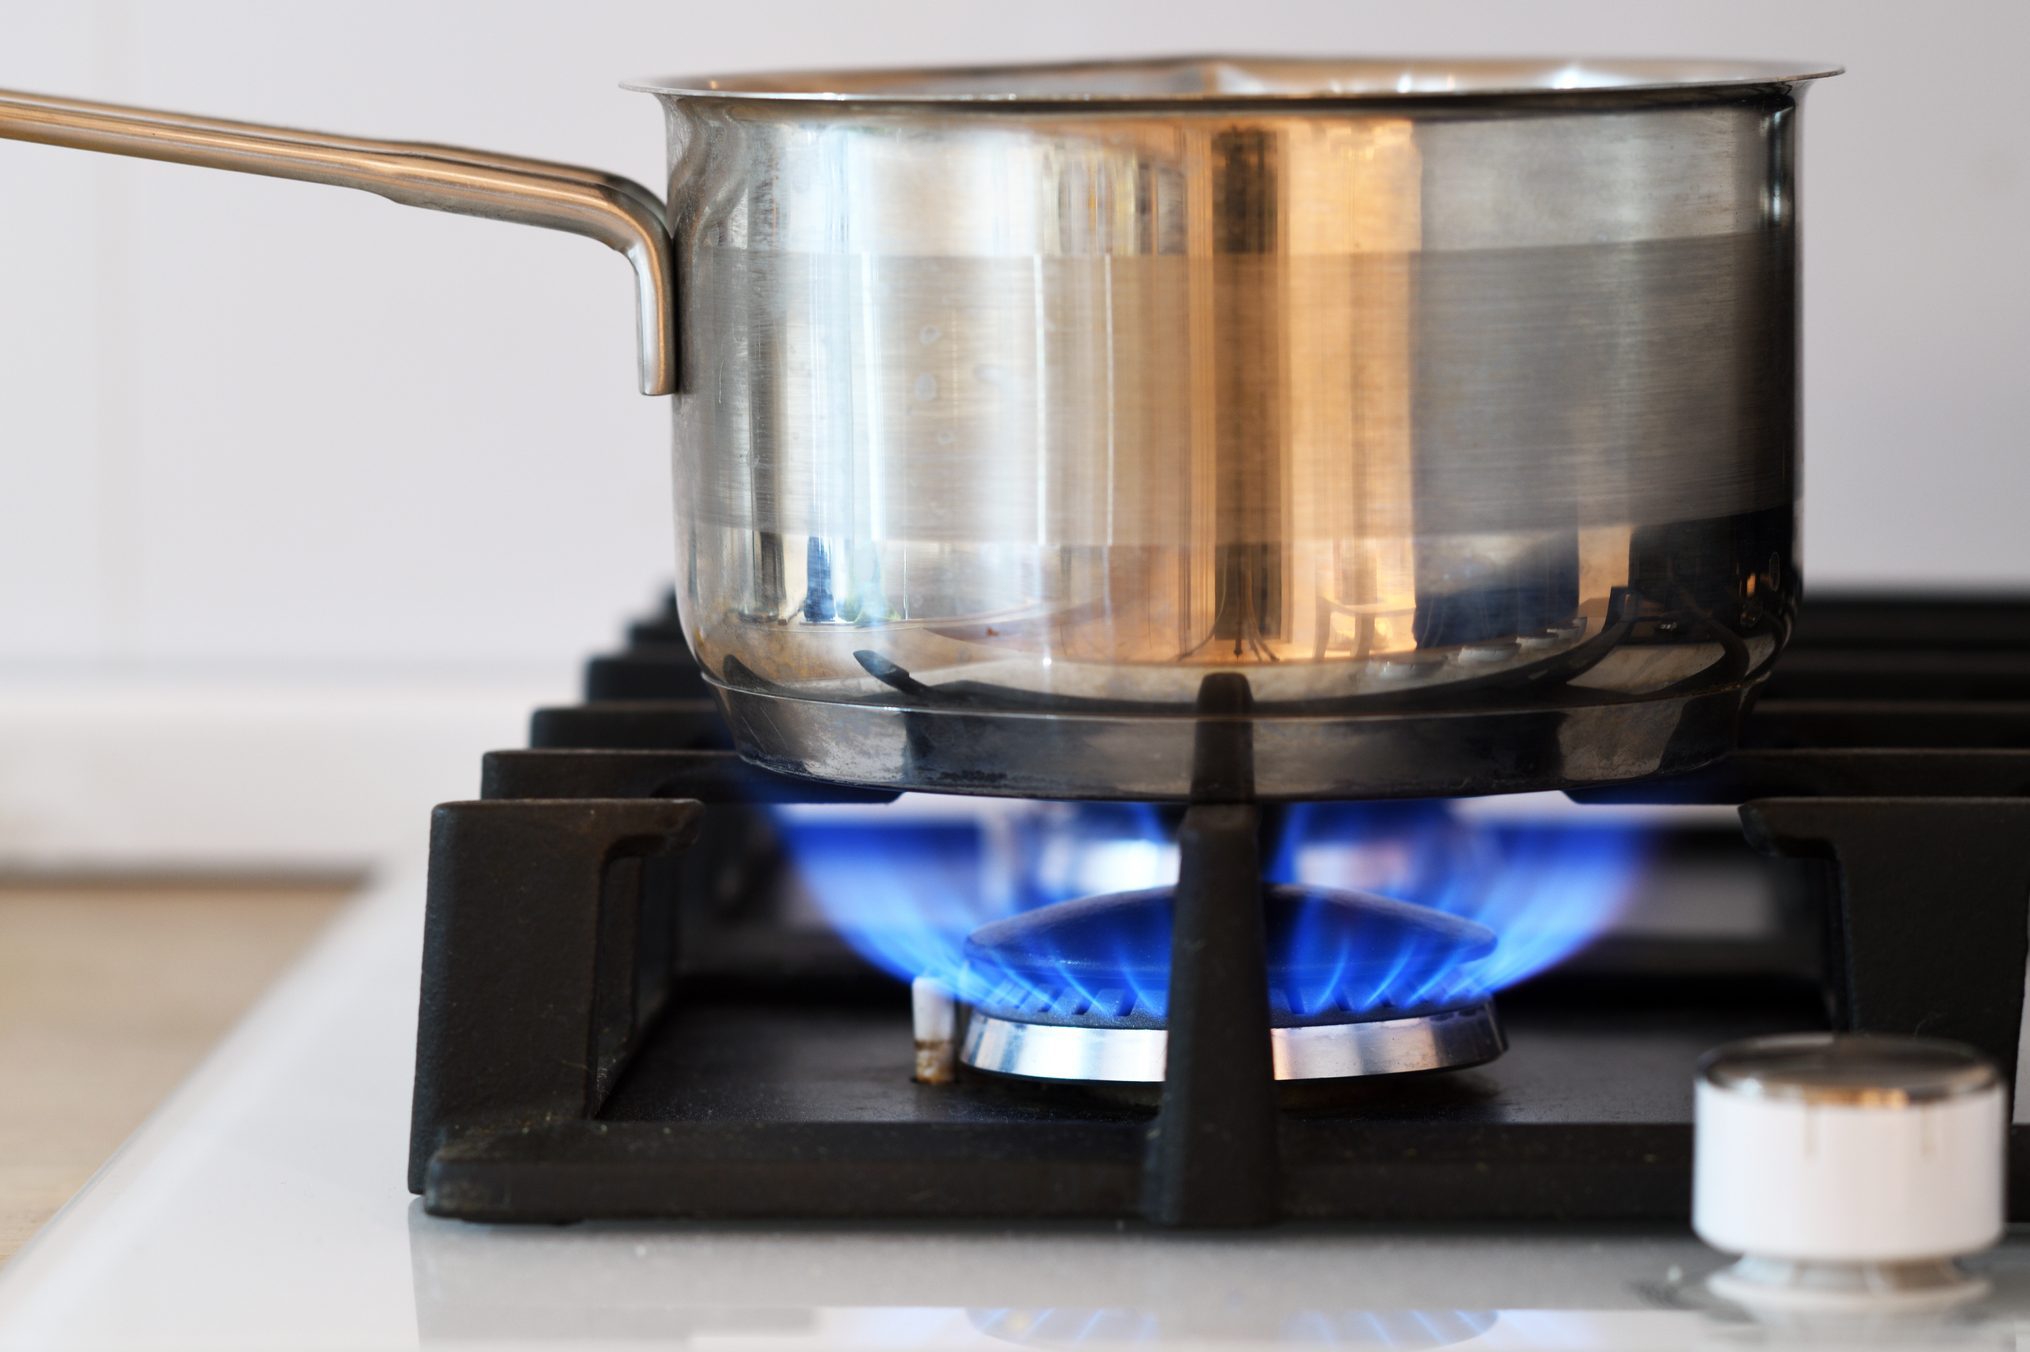 How To Fix a Gas Stove That Won't Light